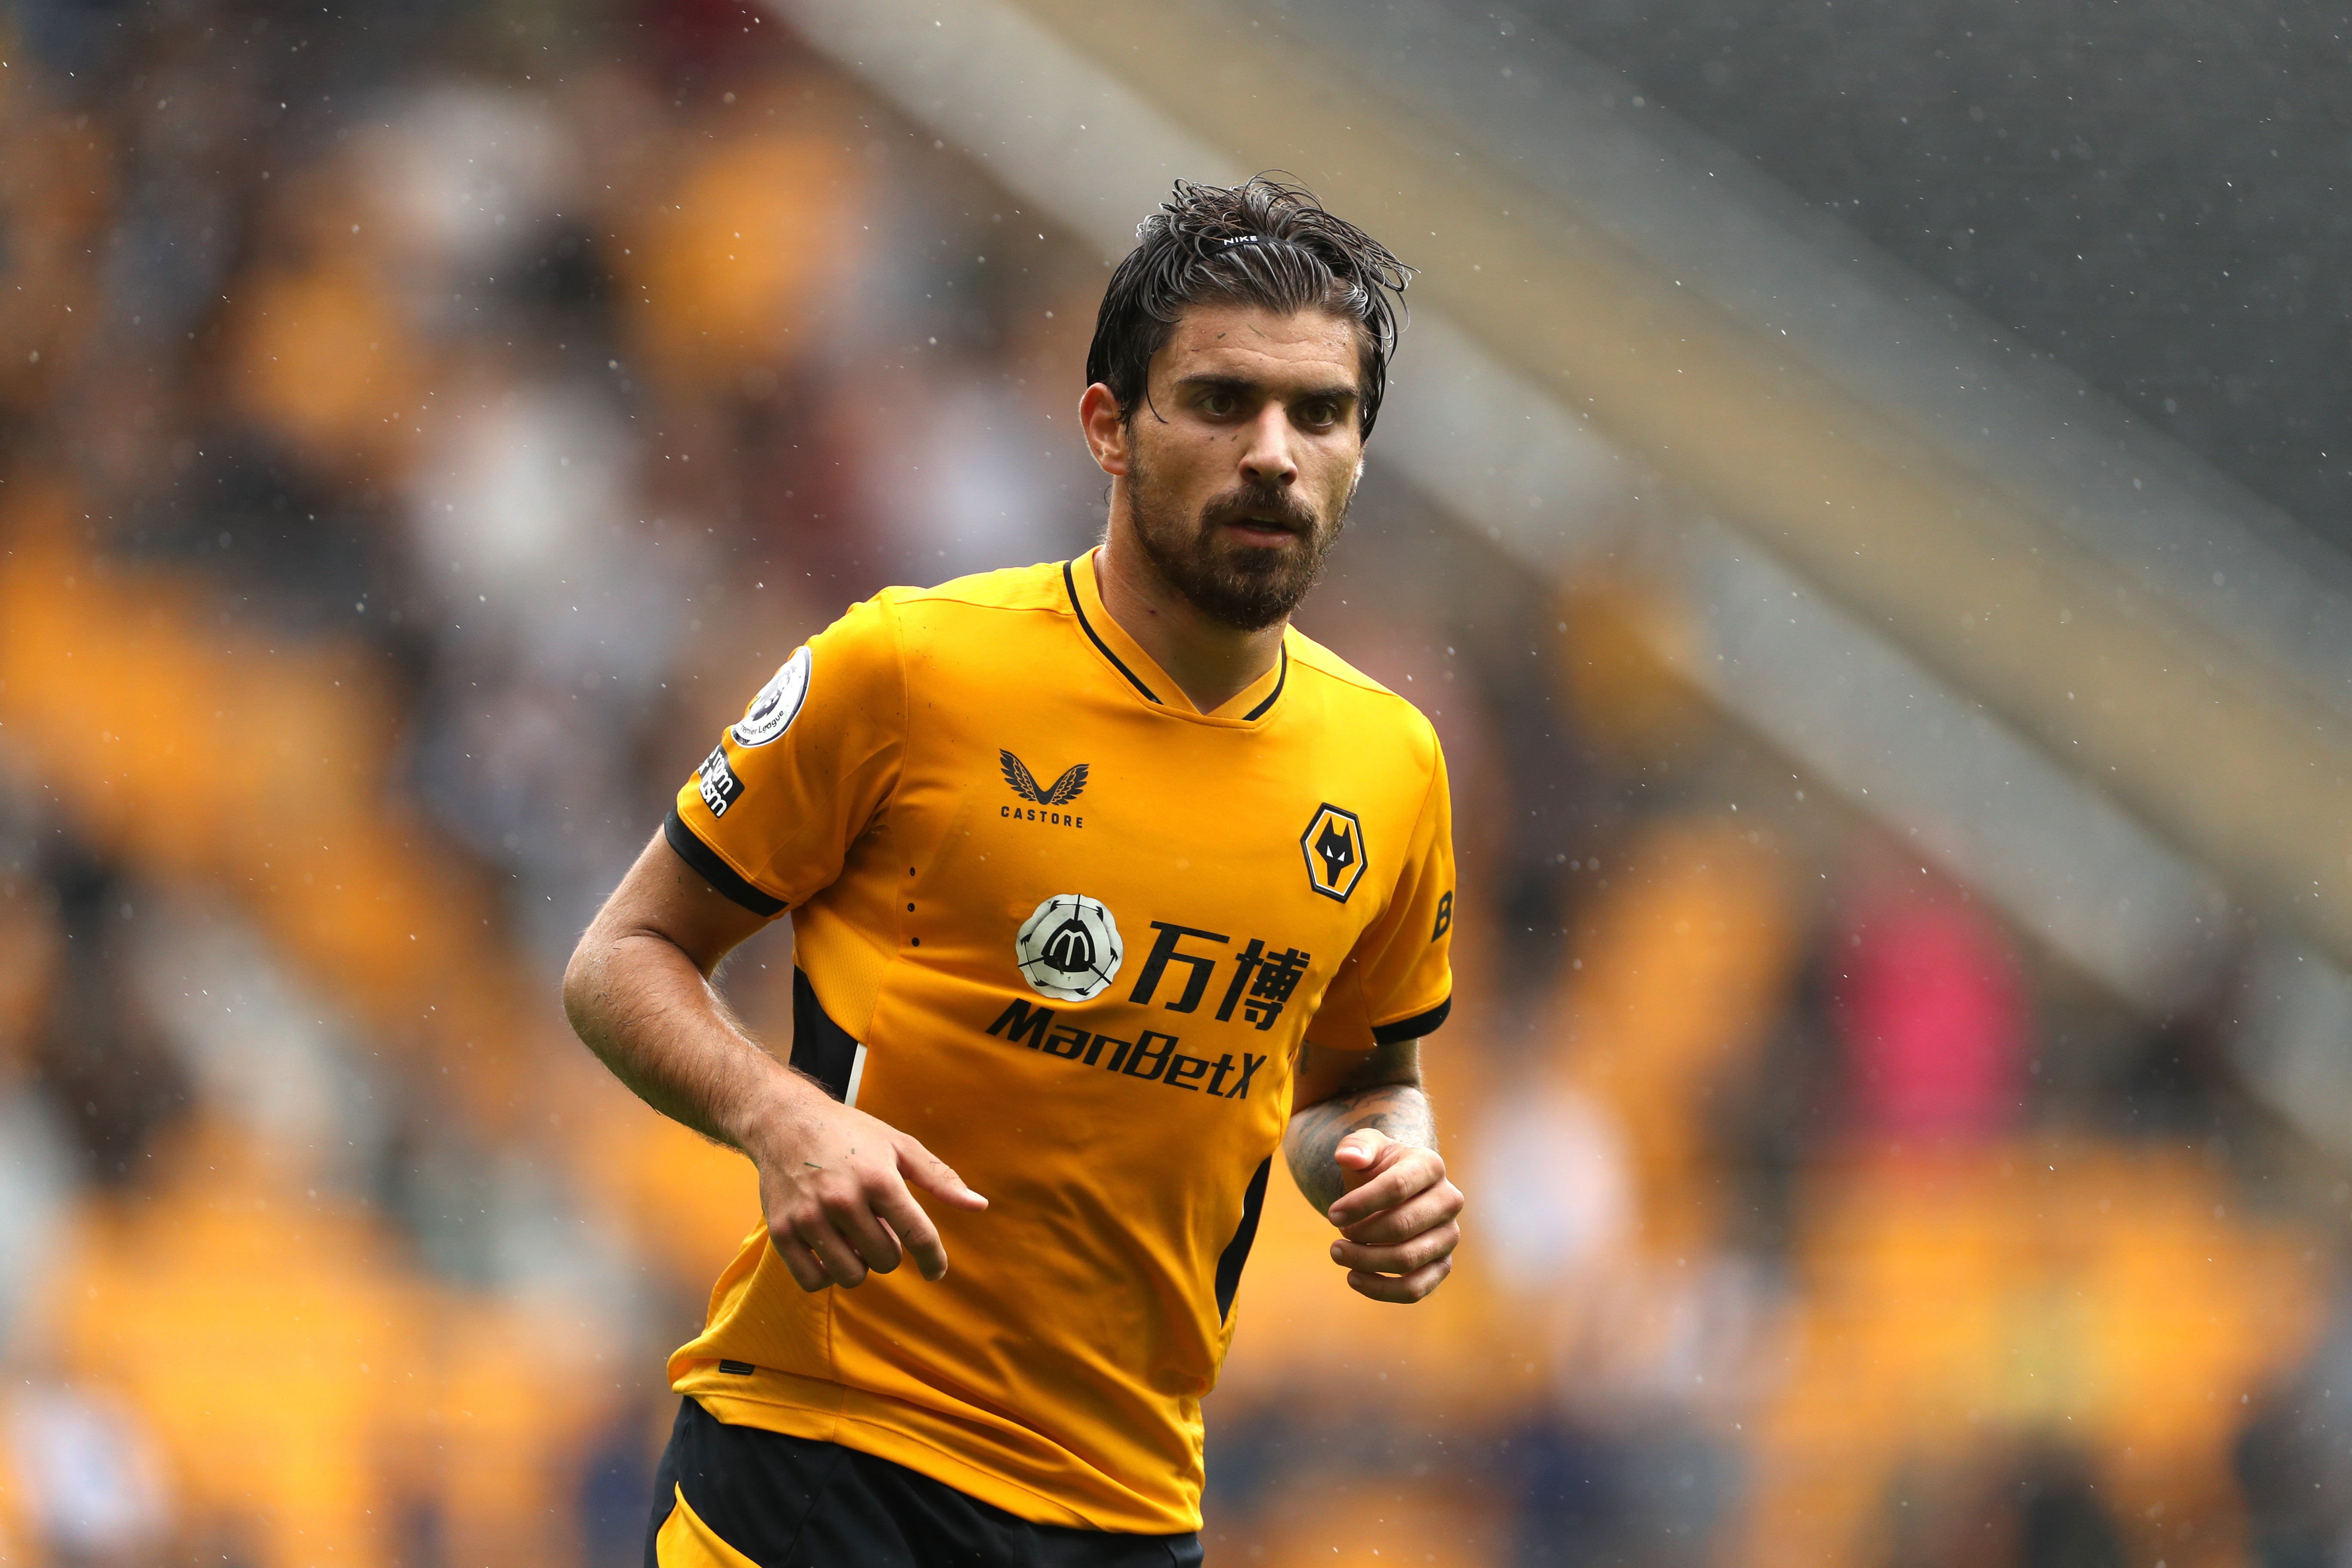 Wolves midfielder Ruben Neves has been the subject of transfer speculation this summer (Bradley Collyer/PA)